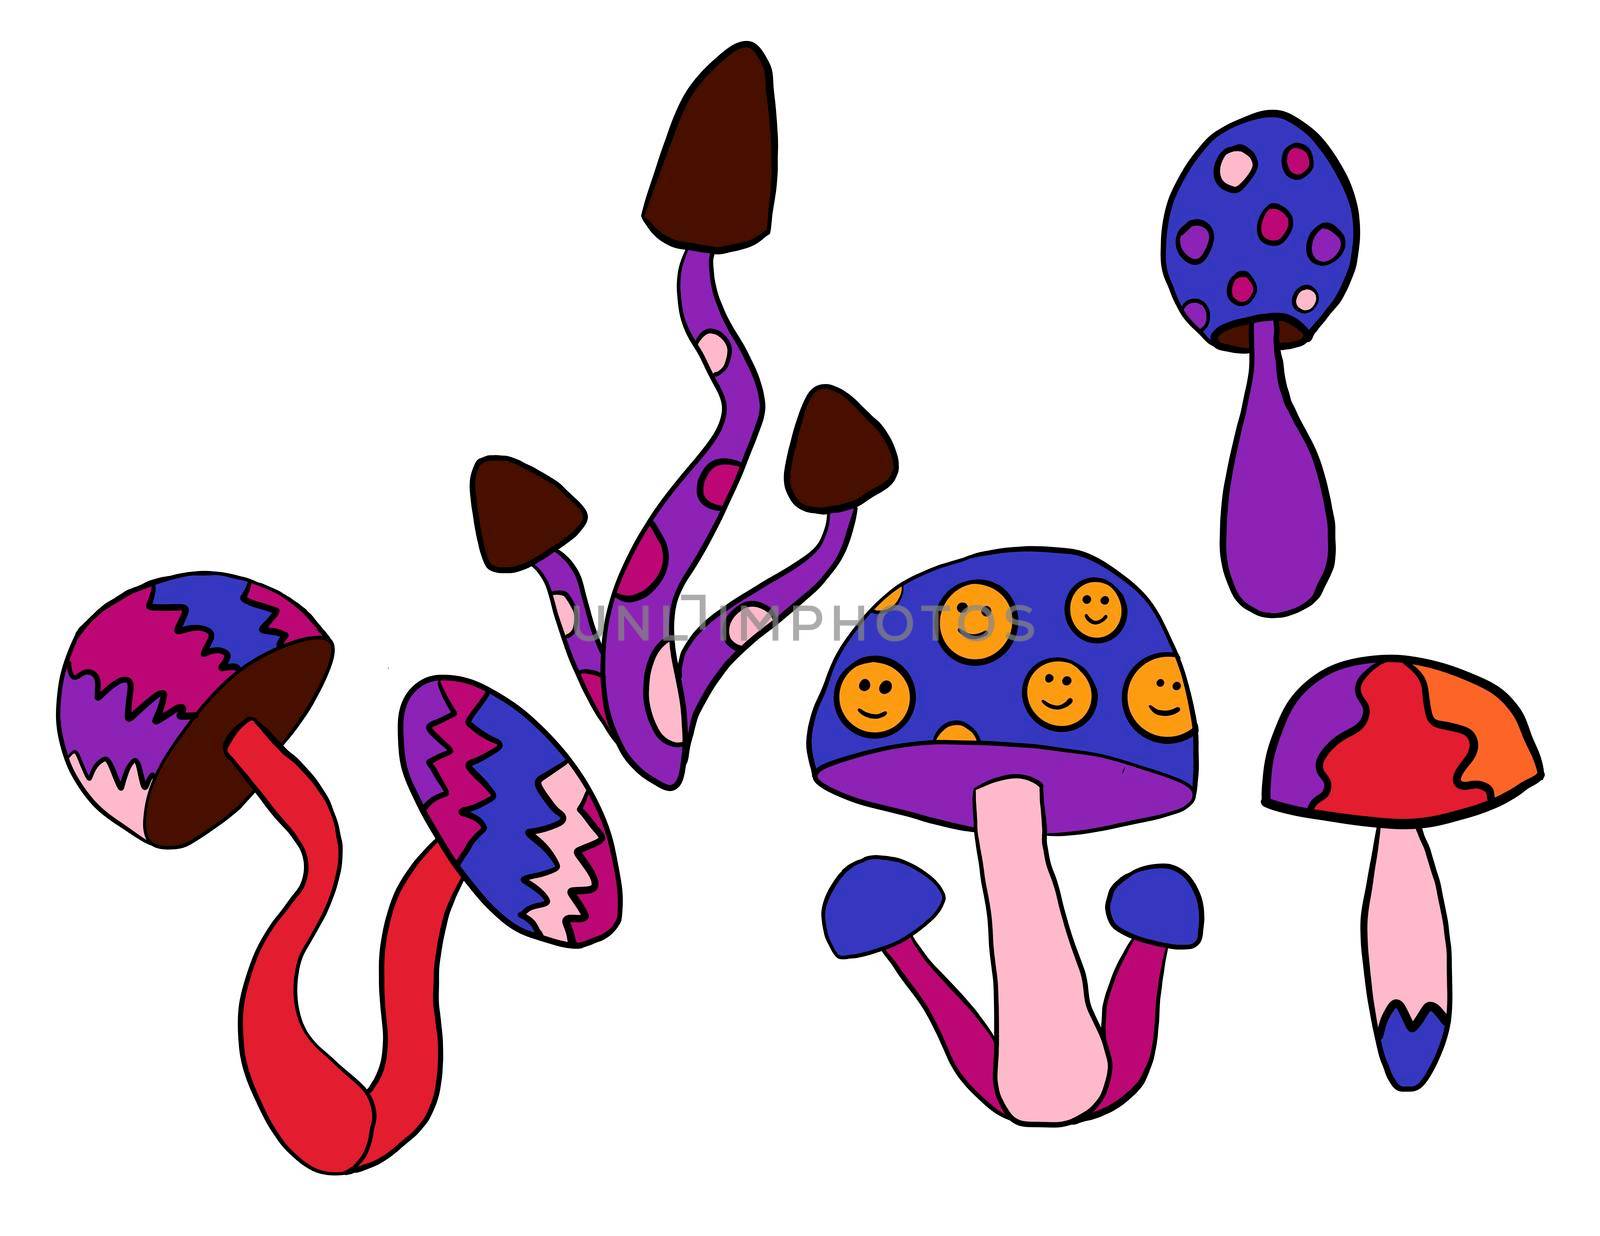 Hand drawn clipart illustration with hippie groovy mushrooms in orange purple blue red colors. Retro vintage 1960s 1970s style, trippy wild bright background with hallucination hypnotic elements. by Lagmar